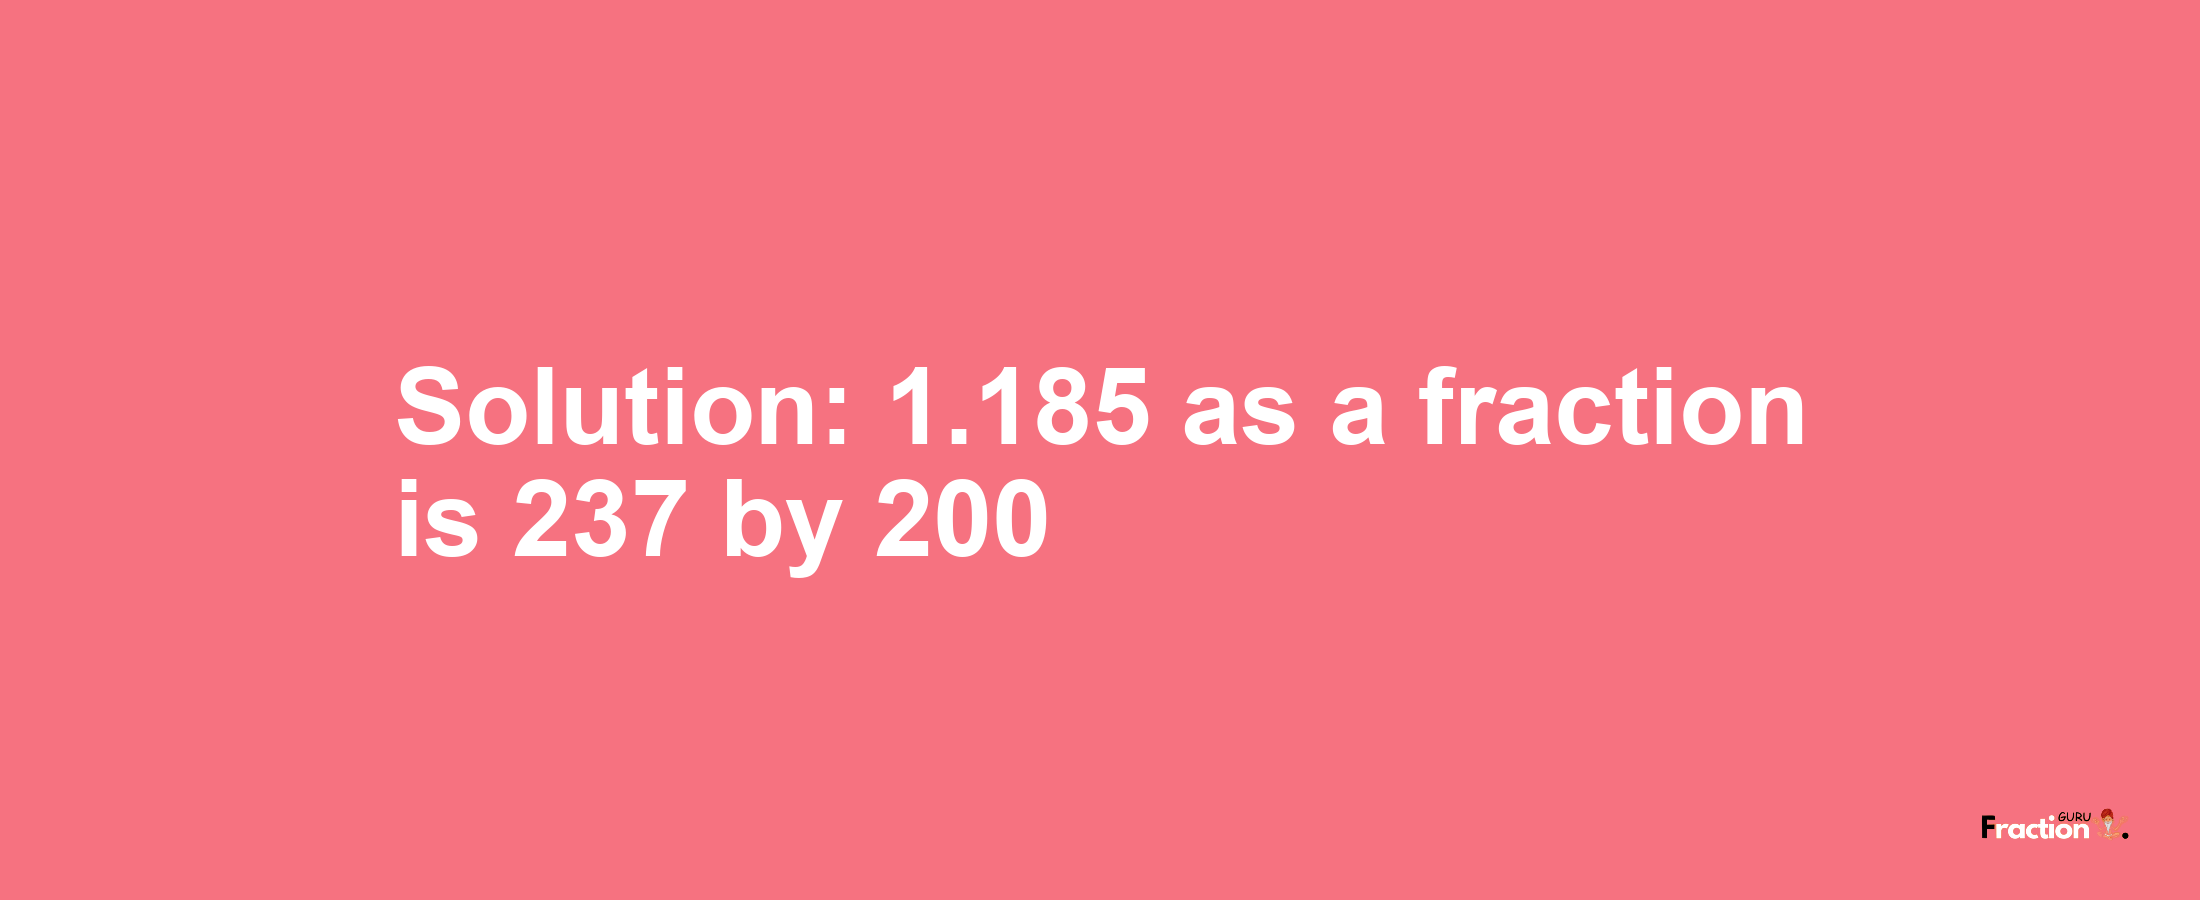 Solution:1.185 as a fraction is 237/200